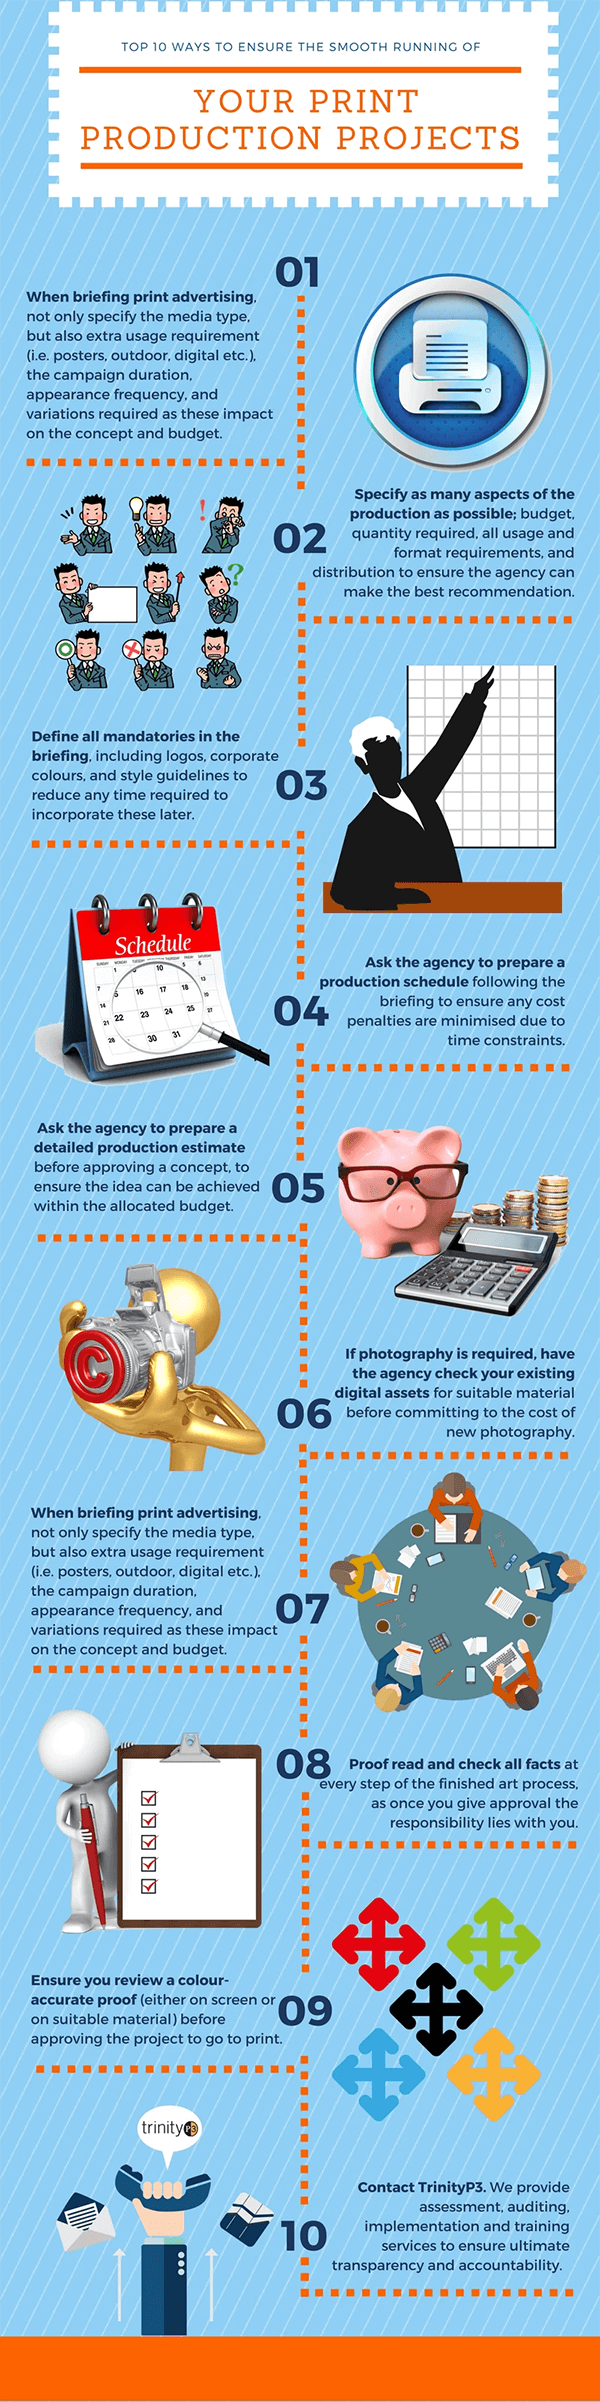 Top 10 ways to ensure the smooth running of your print production projects  - Infographic